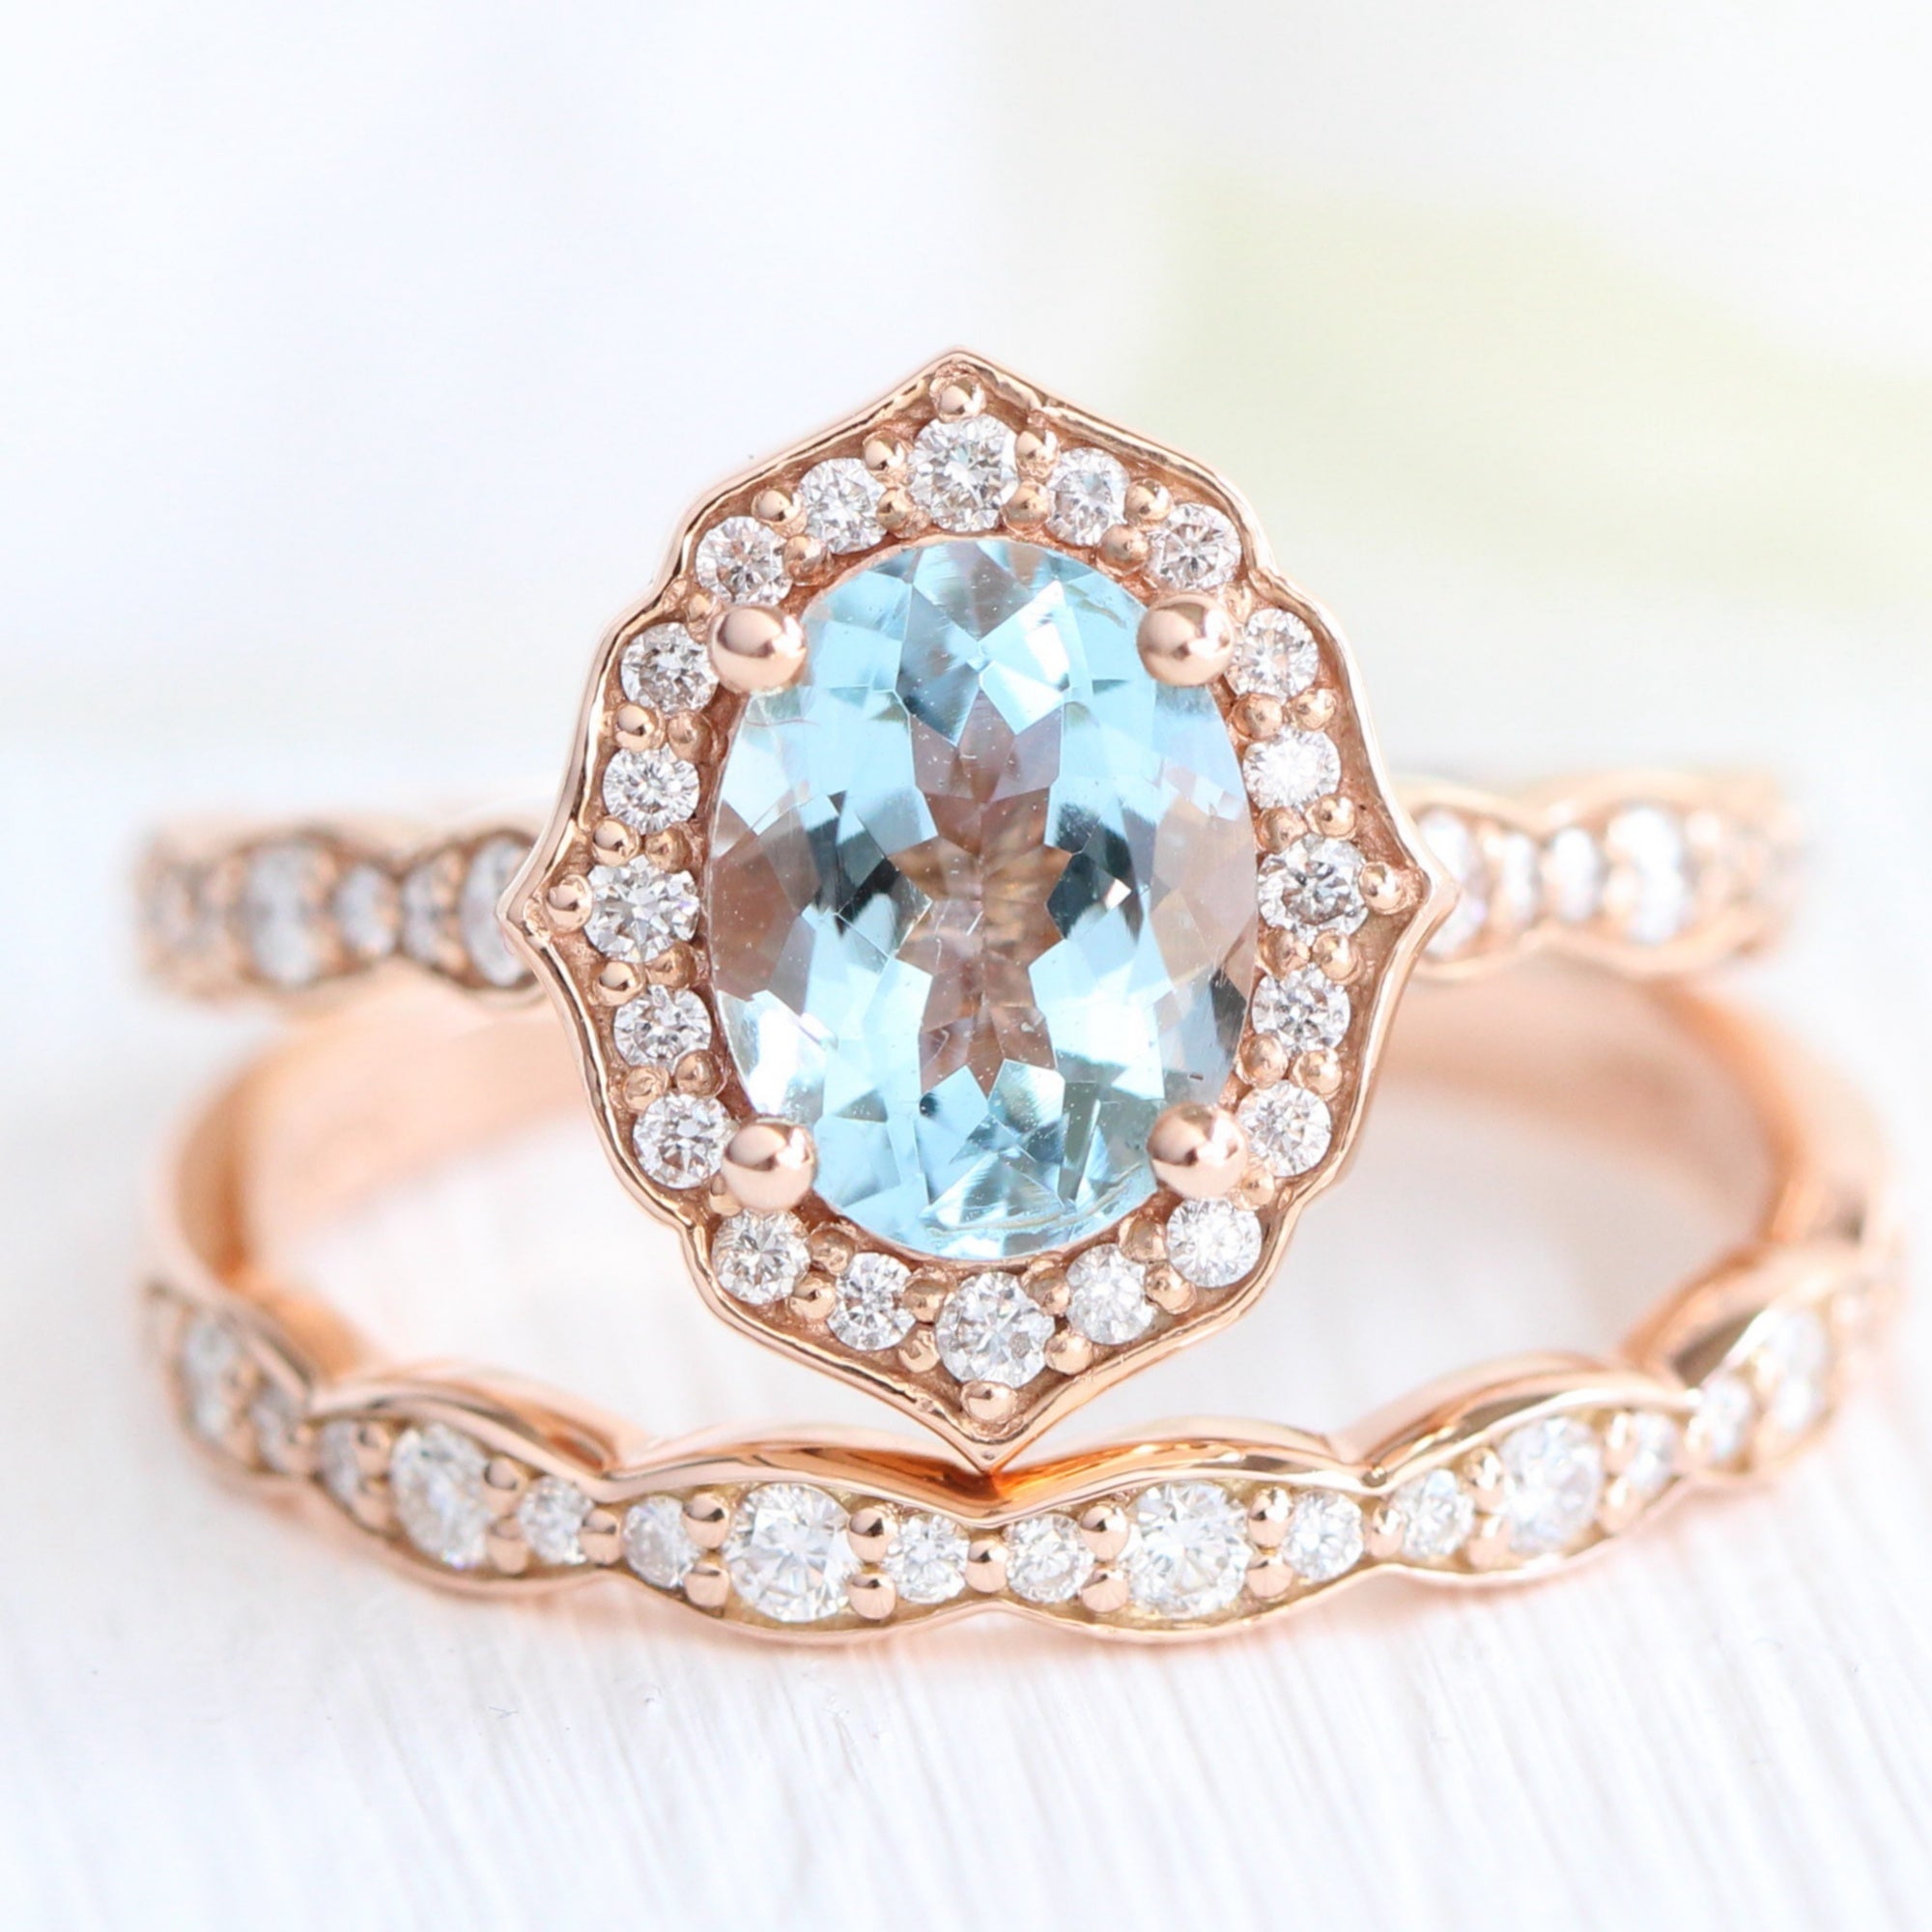 Vintage Floral Oval Aquamarine Ring w/ Diamonds in Scalloped Band